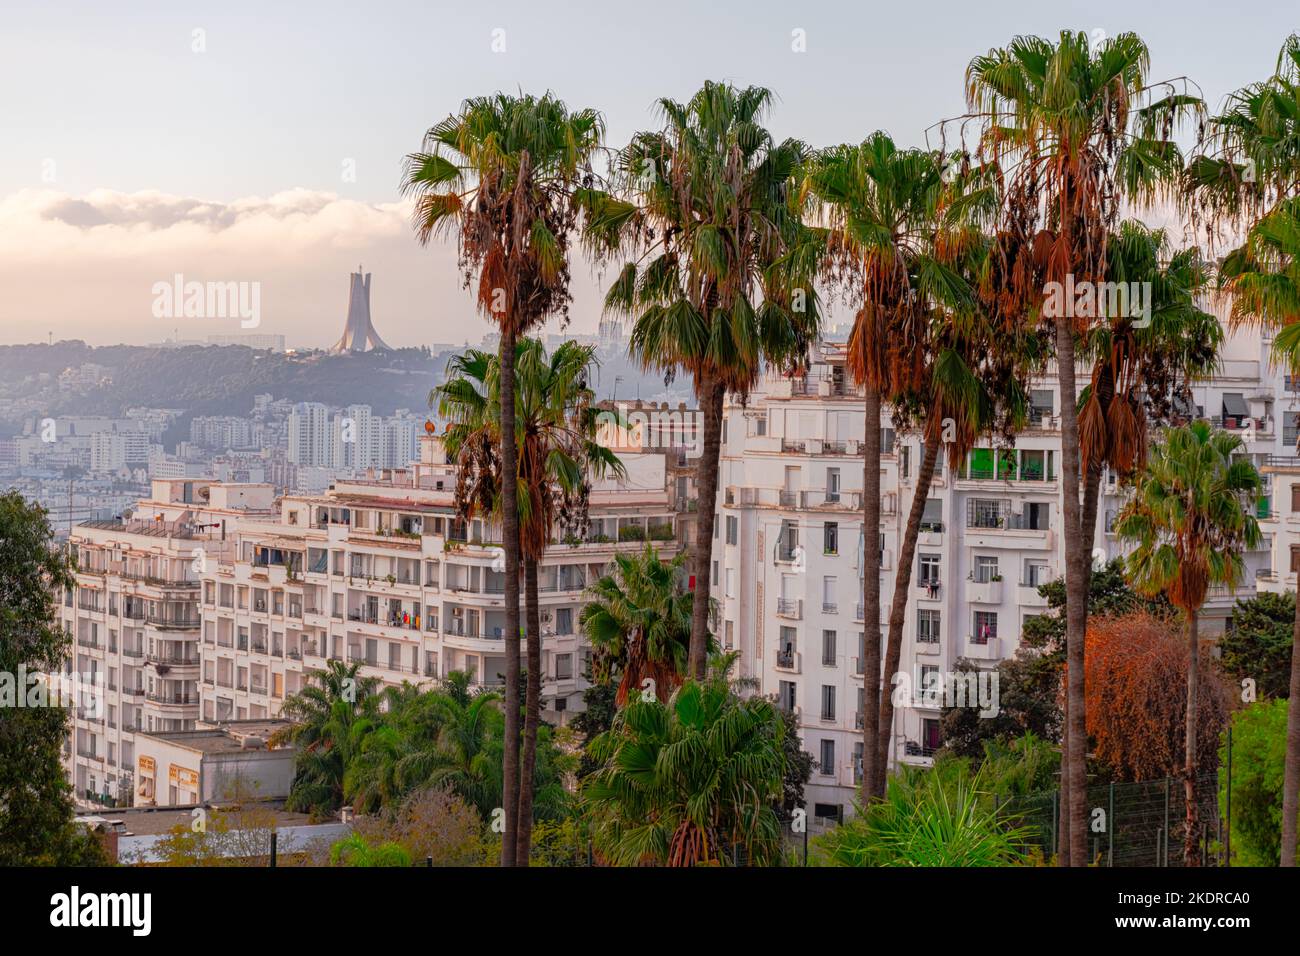 The Martyr's Memorial National Monument of Algiers seen from Ave du Docteur Frantz Fanon, El Djazair. Palm trees and buildings in blue hour lights. Stock Photo